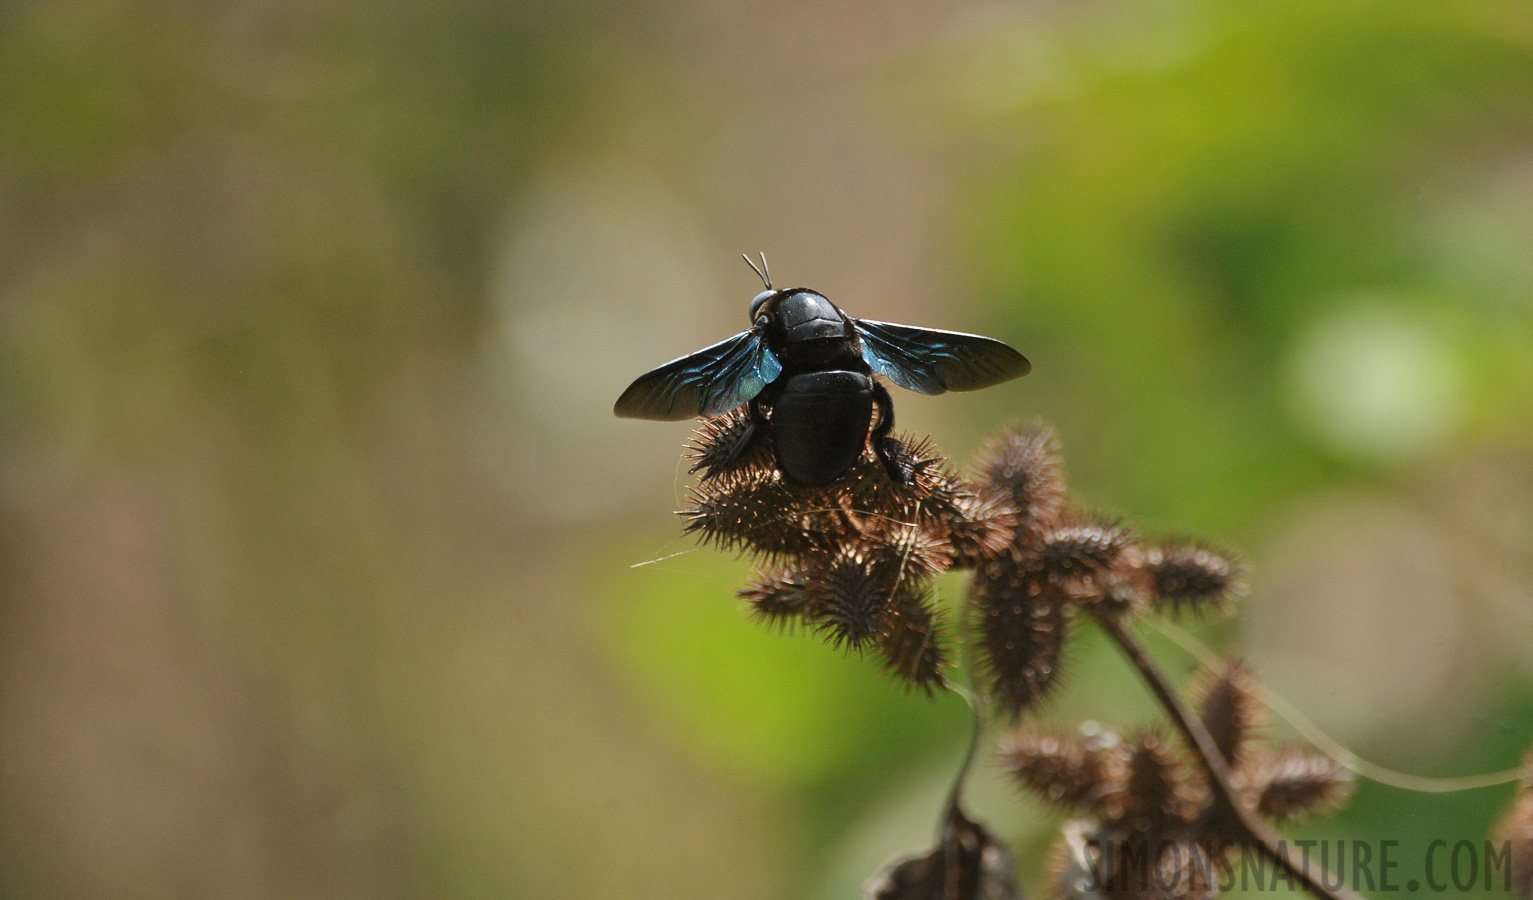 Xylocopa tenuiscapa [550 mm, 1/3200 sec at f / 7.1, ISO 1600]